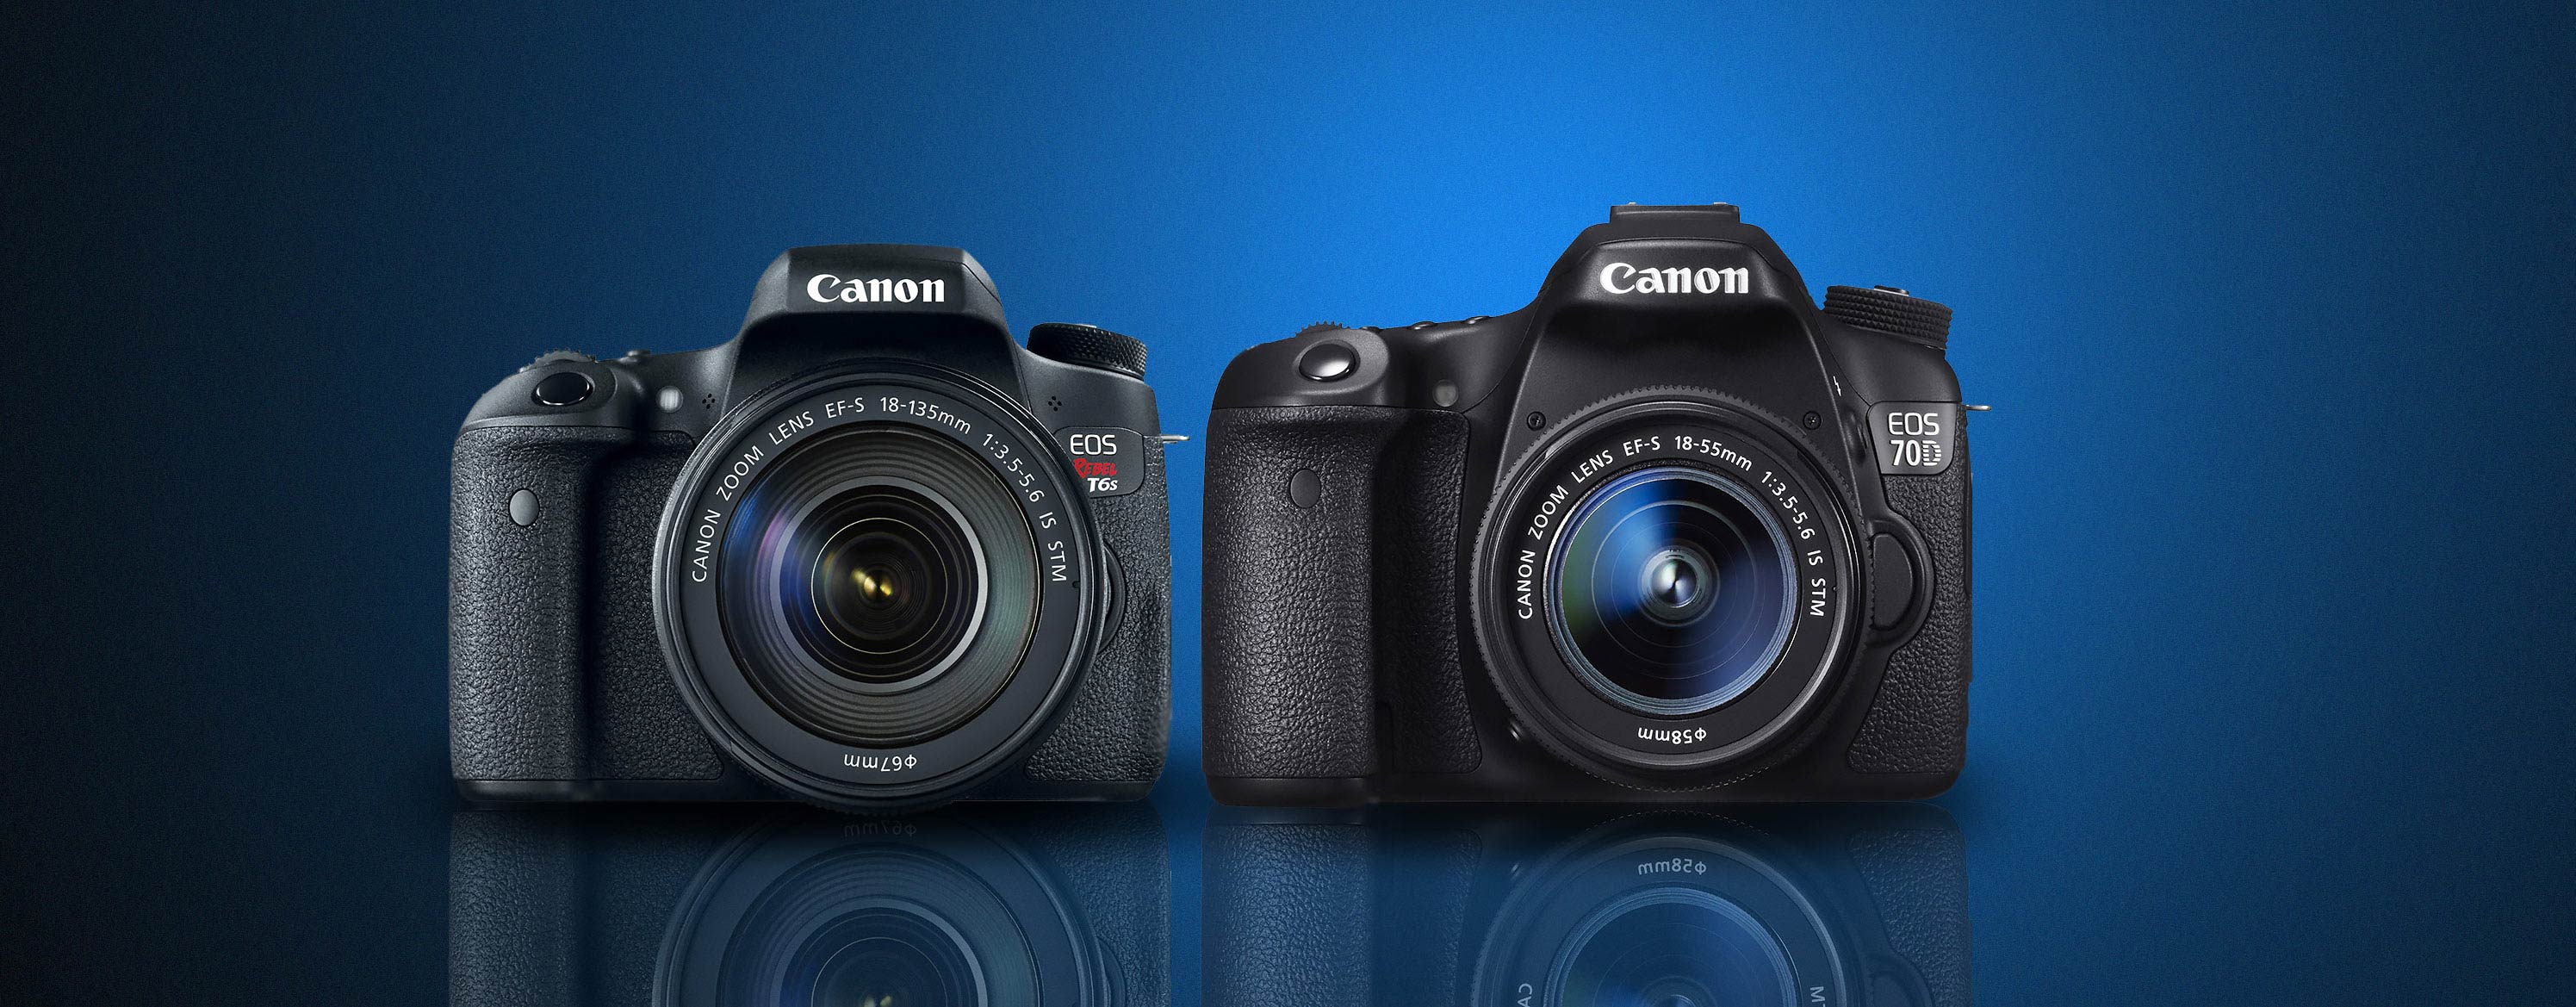 Canon T6s vs 70D: Which Should You Buy? - Light And Matter